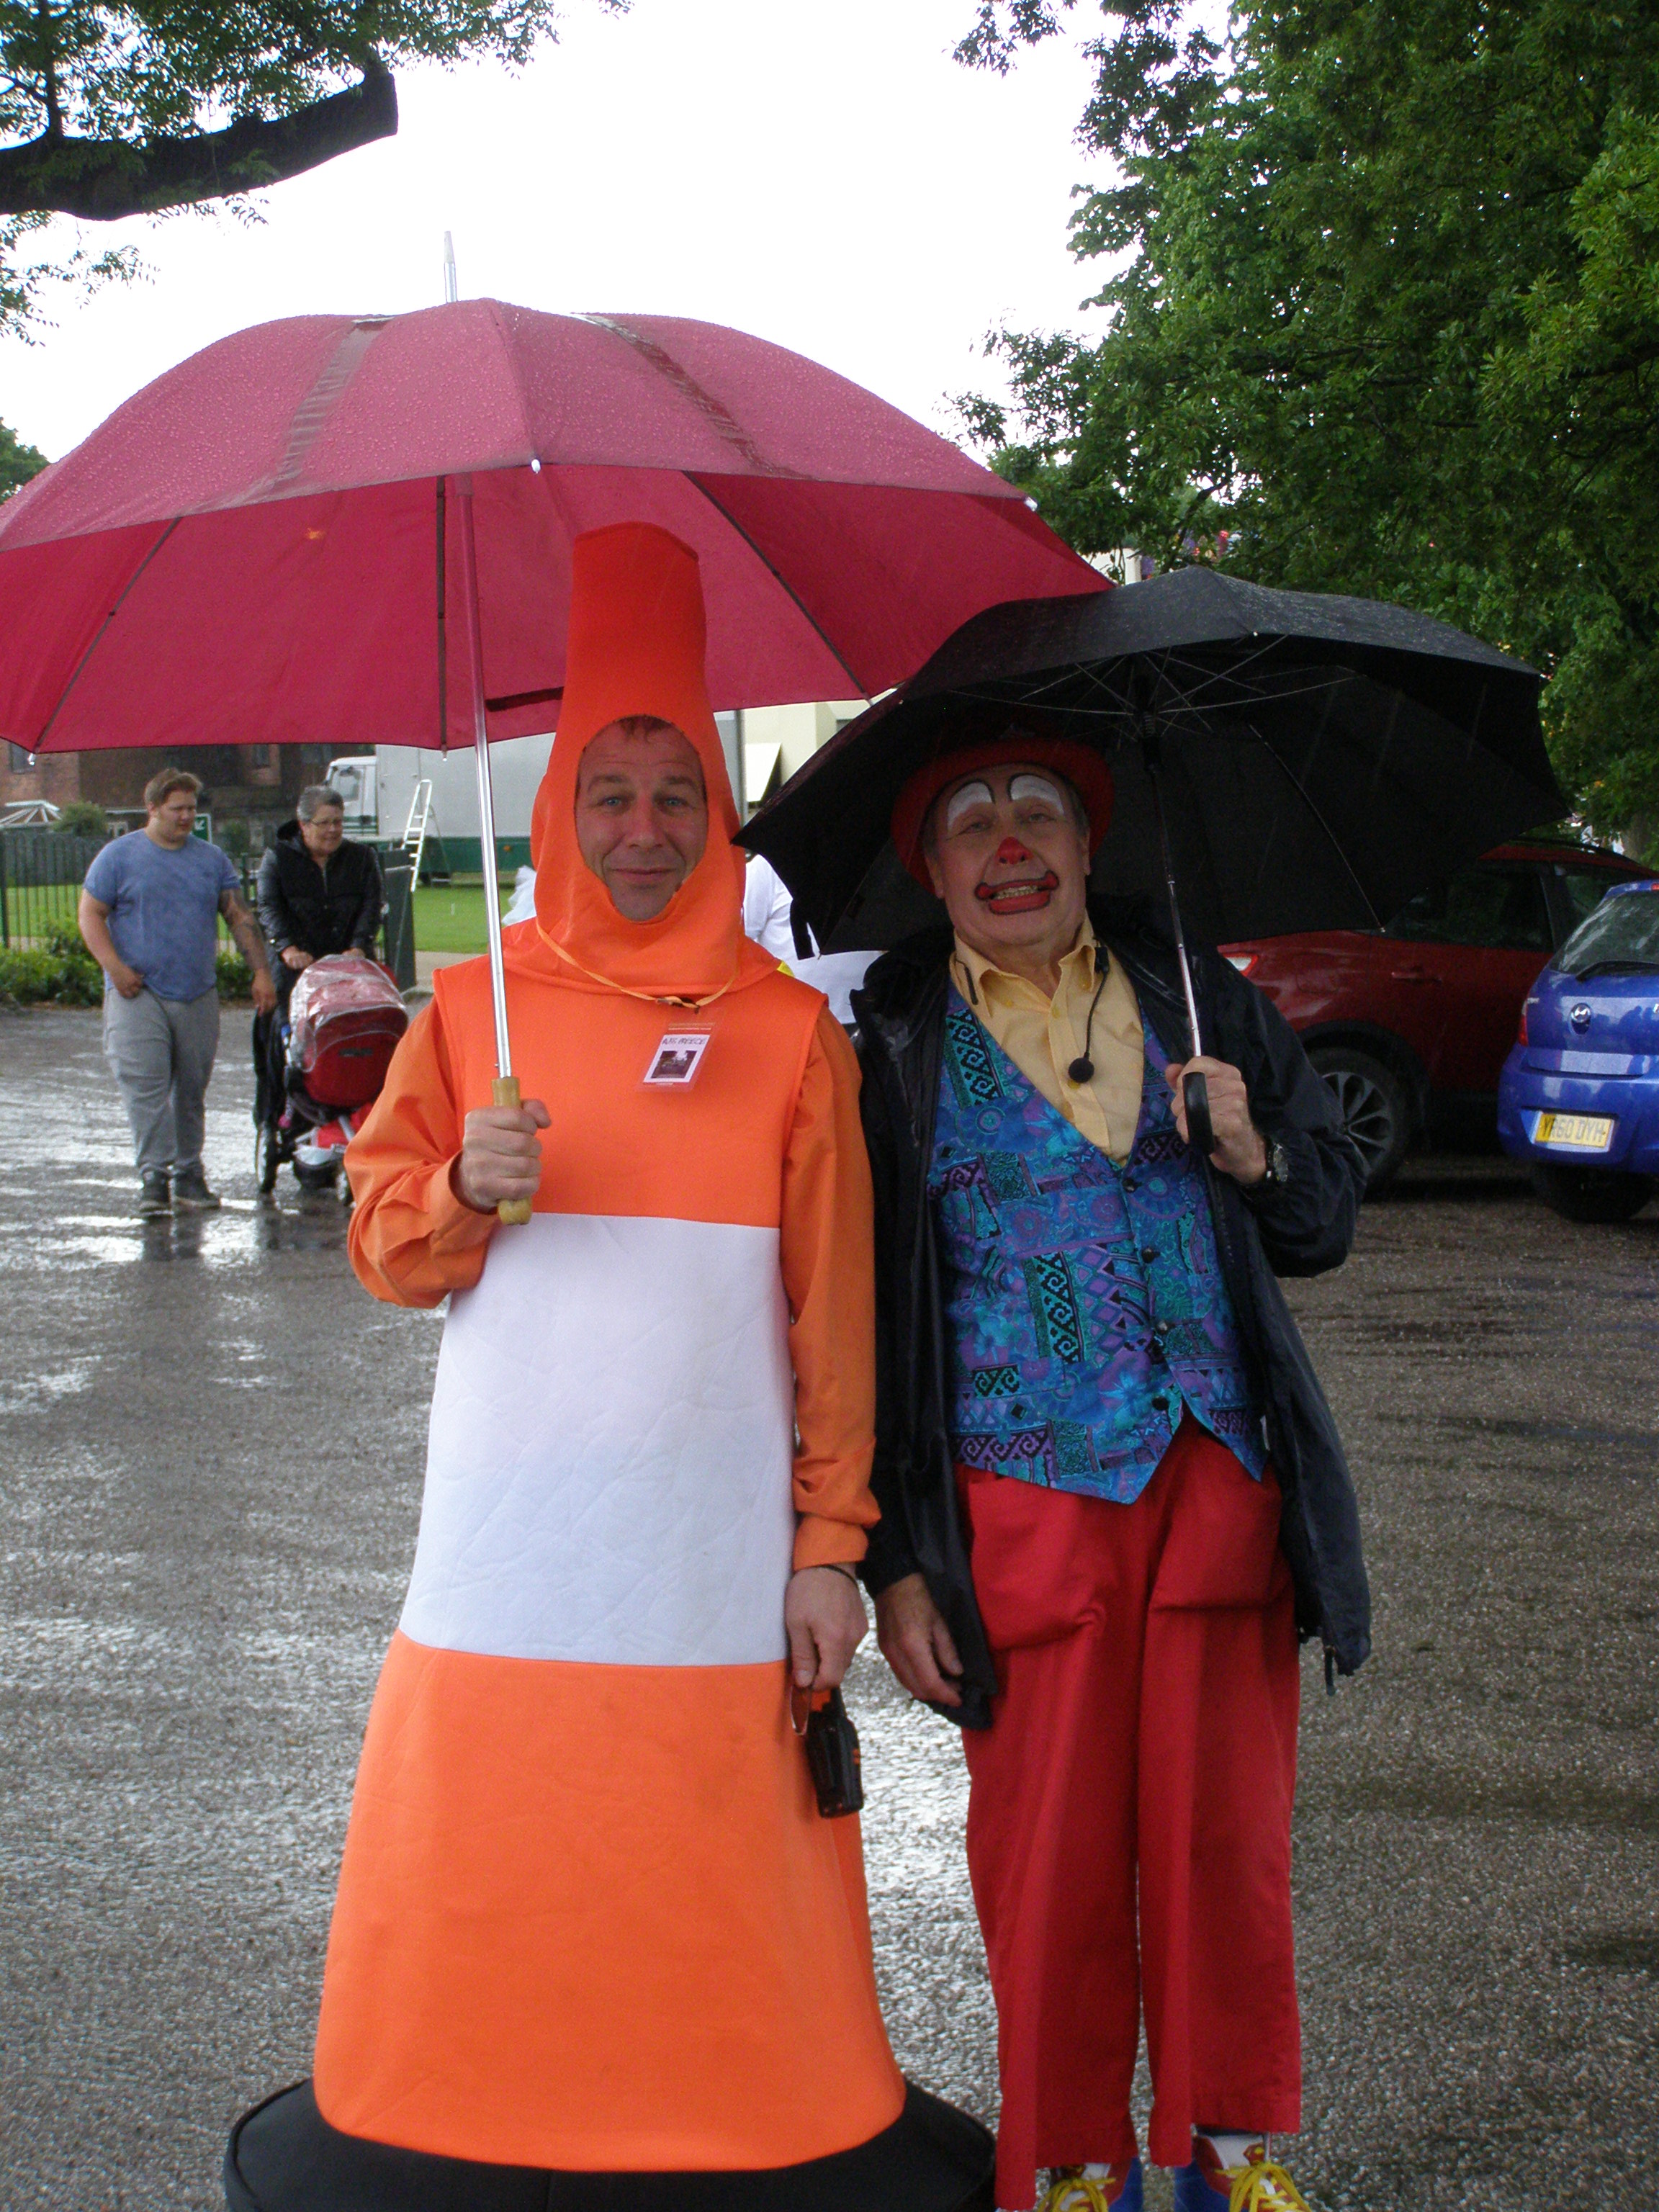 Russ the Cone and Carlo the Clown